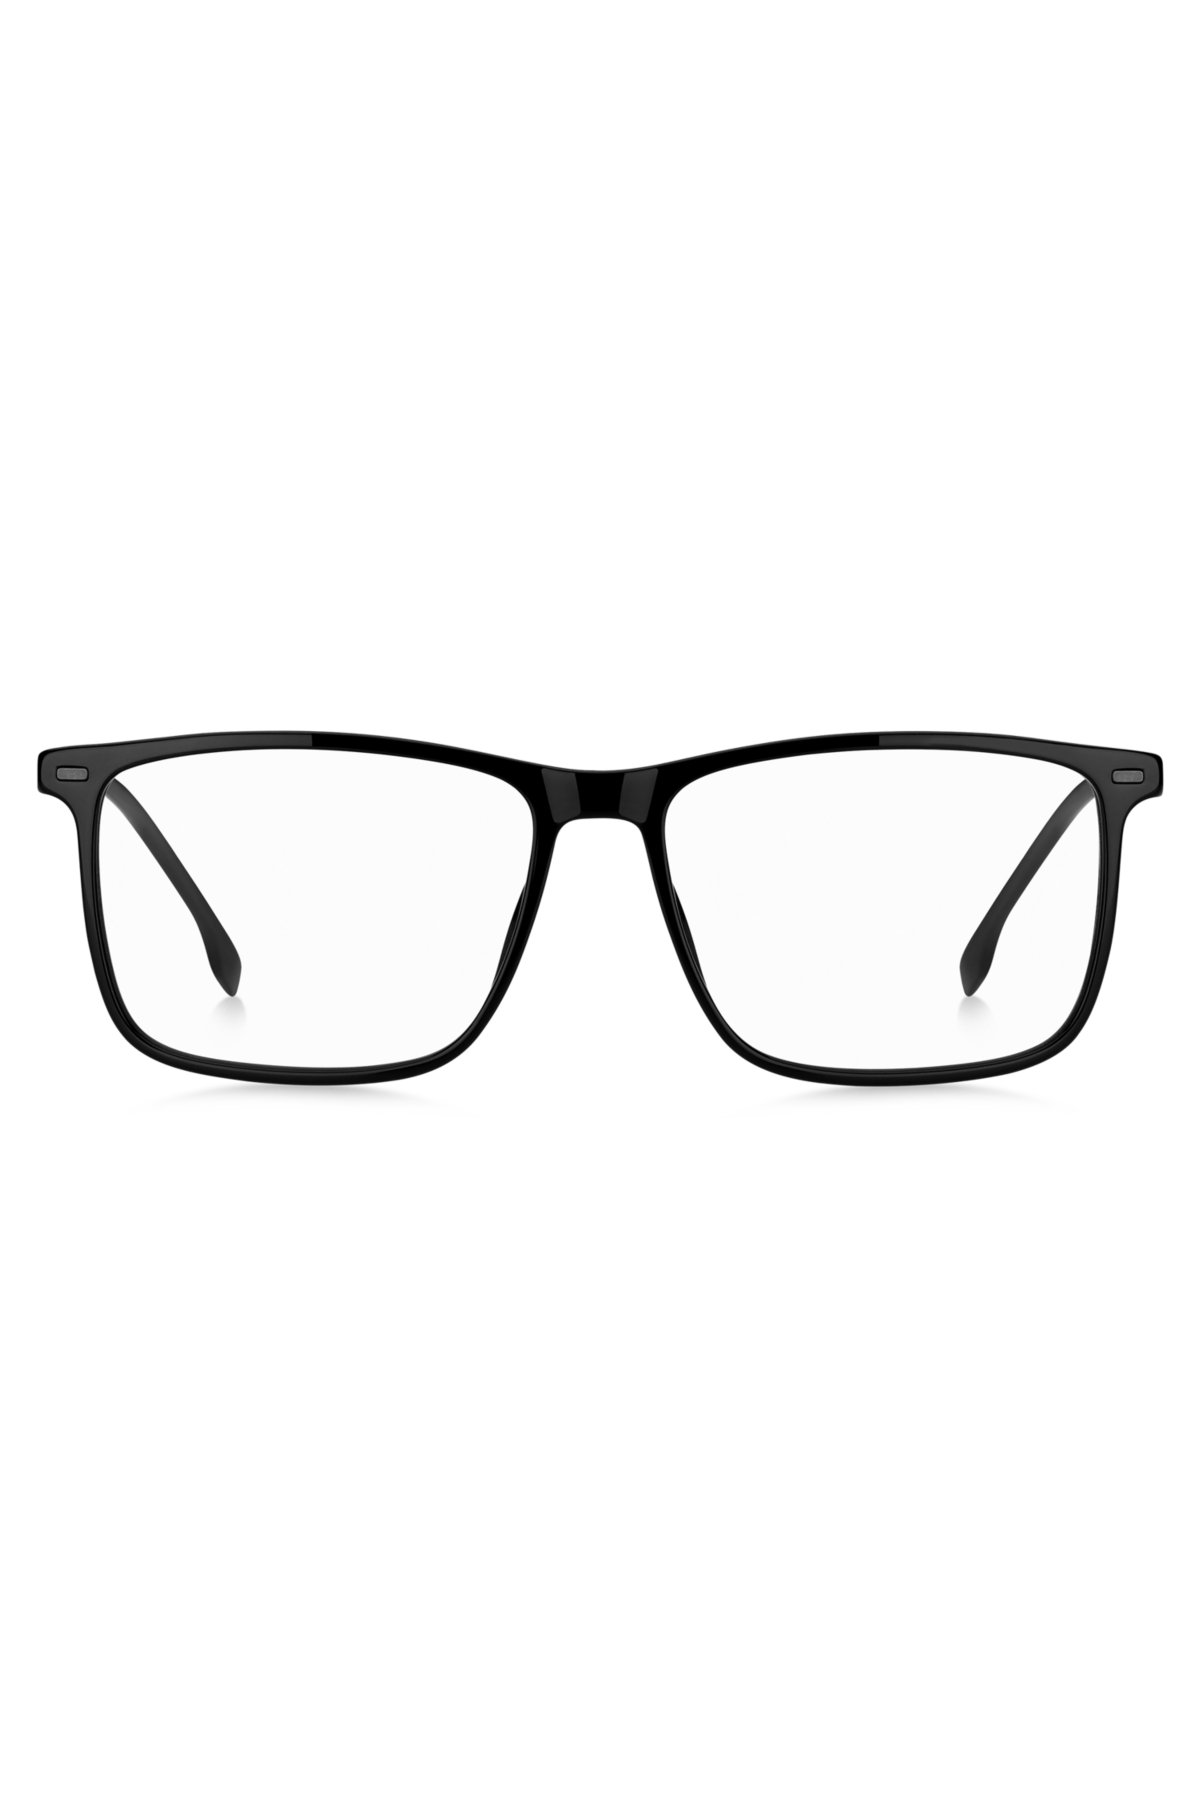 BOSS - Black-acetate optical frames with black-steel temples